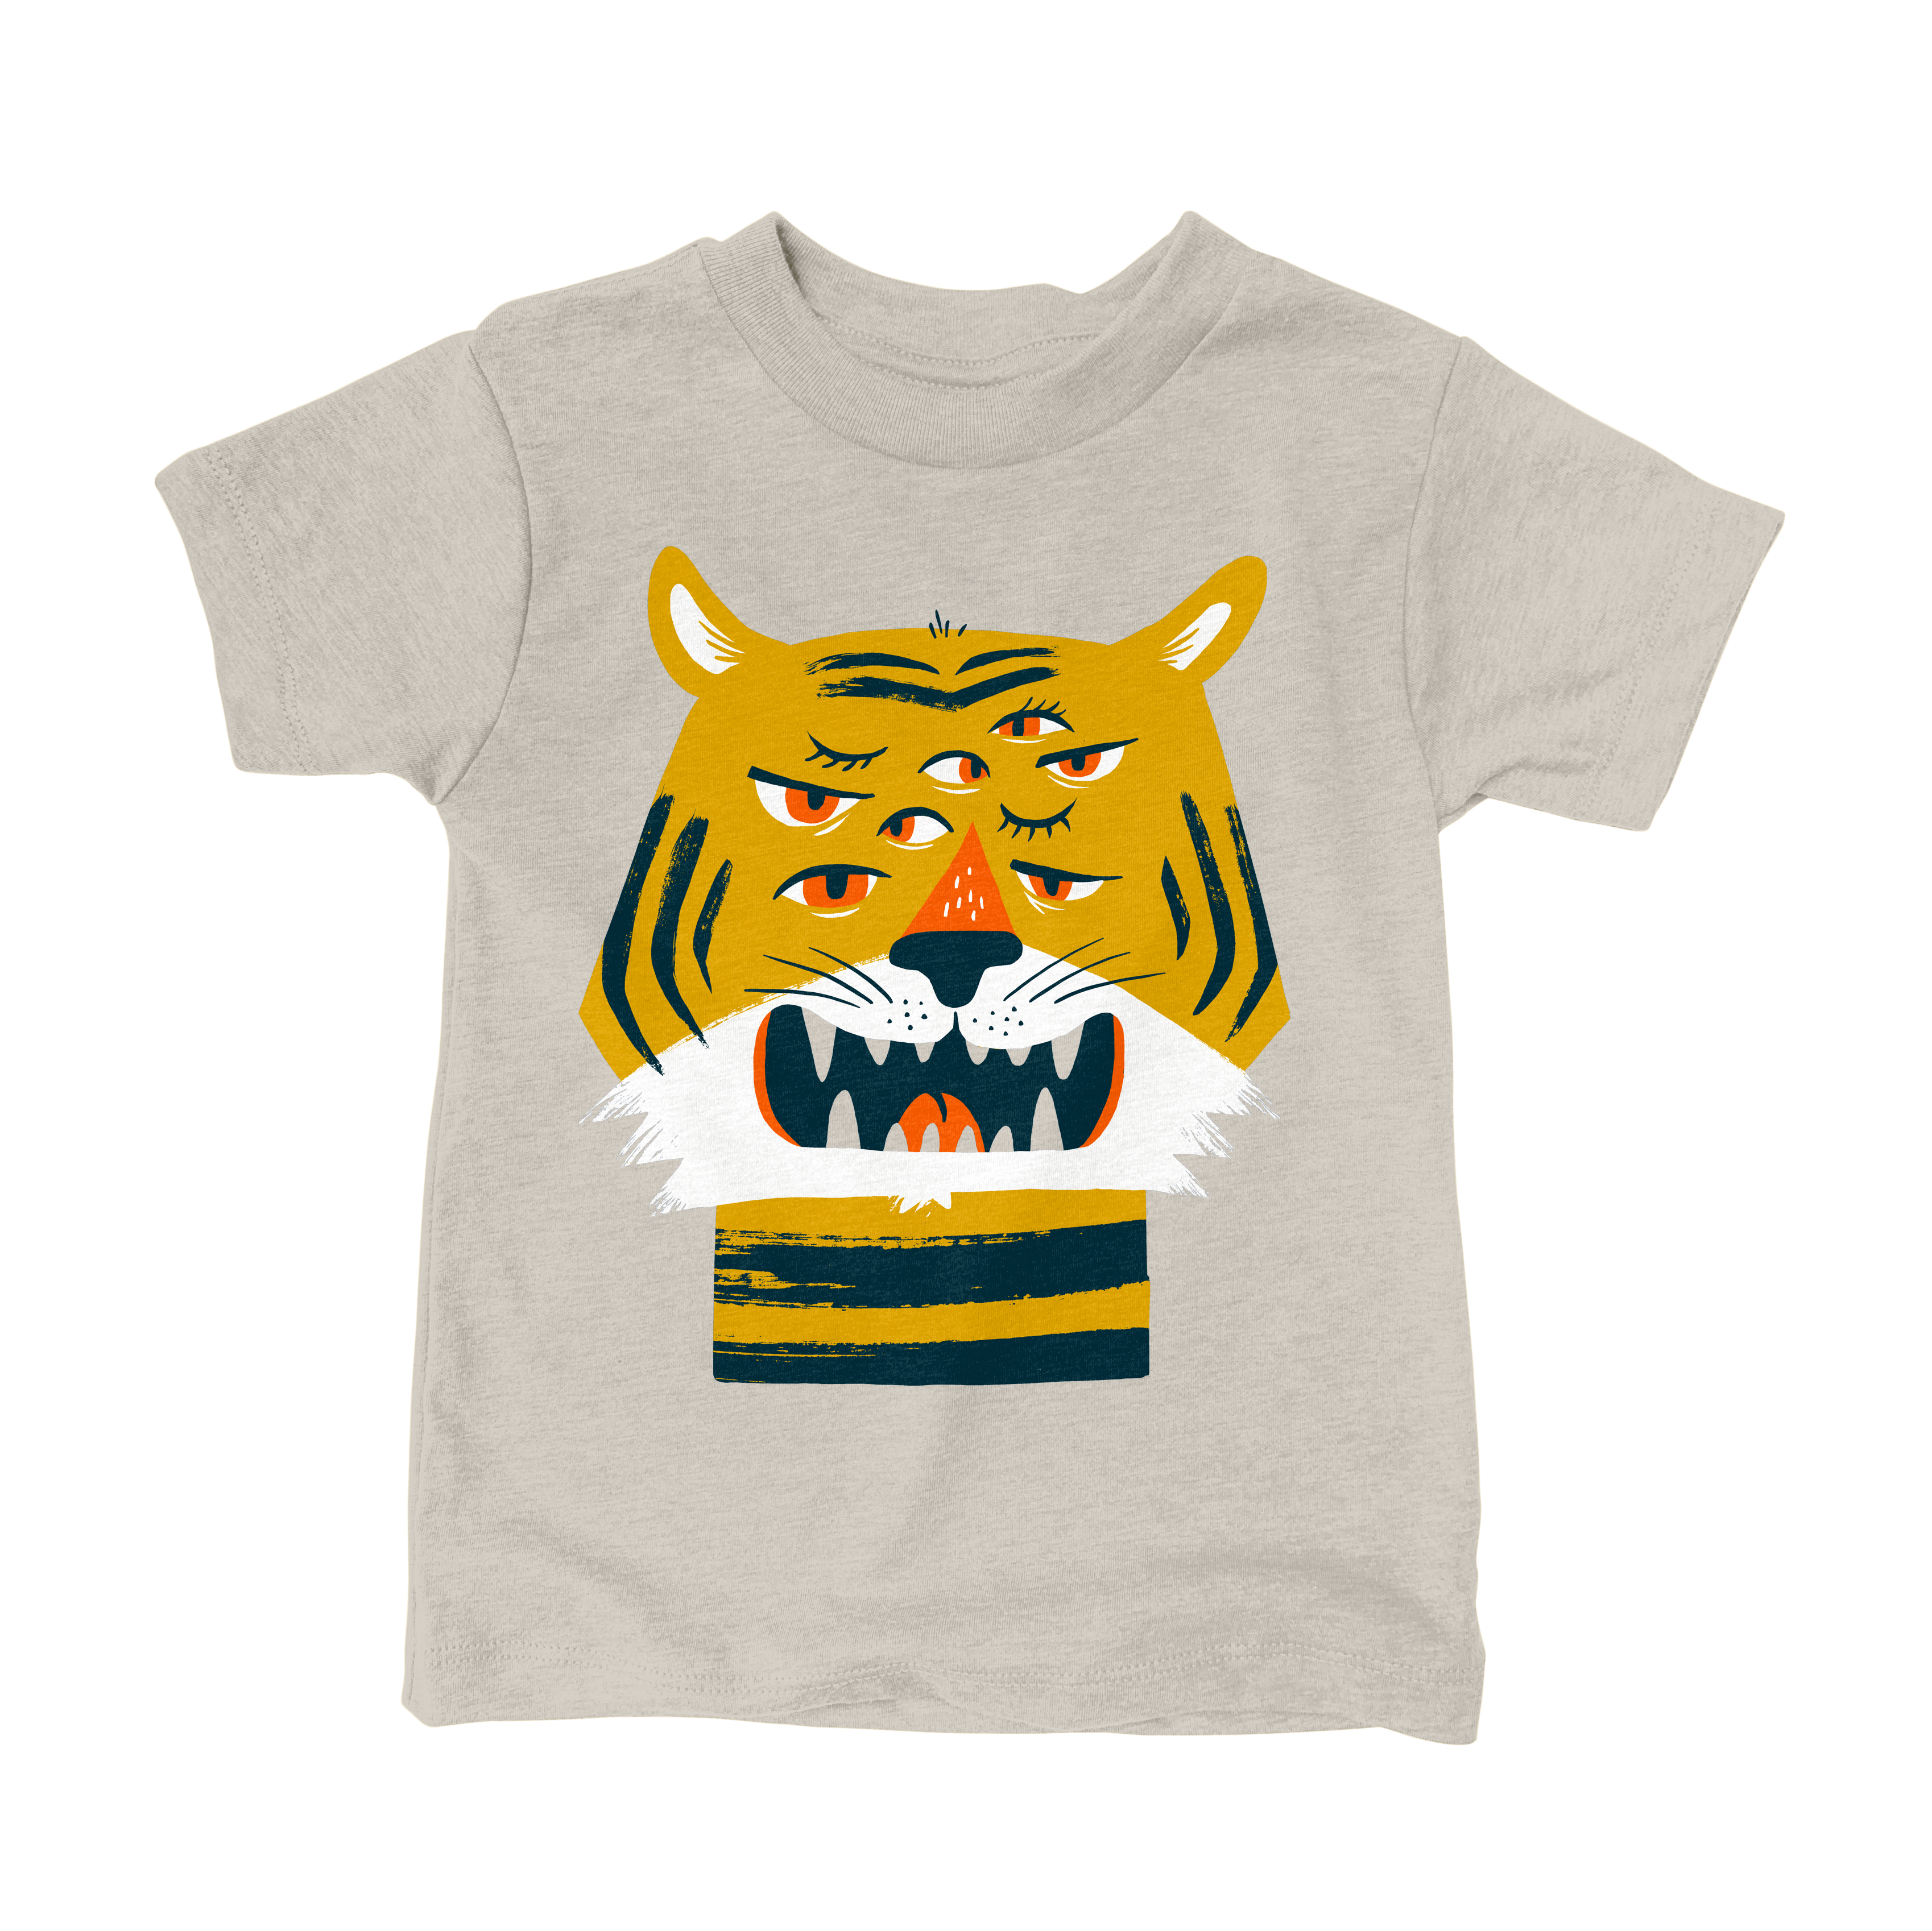 Factory 43 - Eyes of the tiger (Kids Tee): Youth / Medium (10-12) / Dust